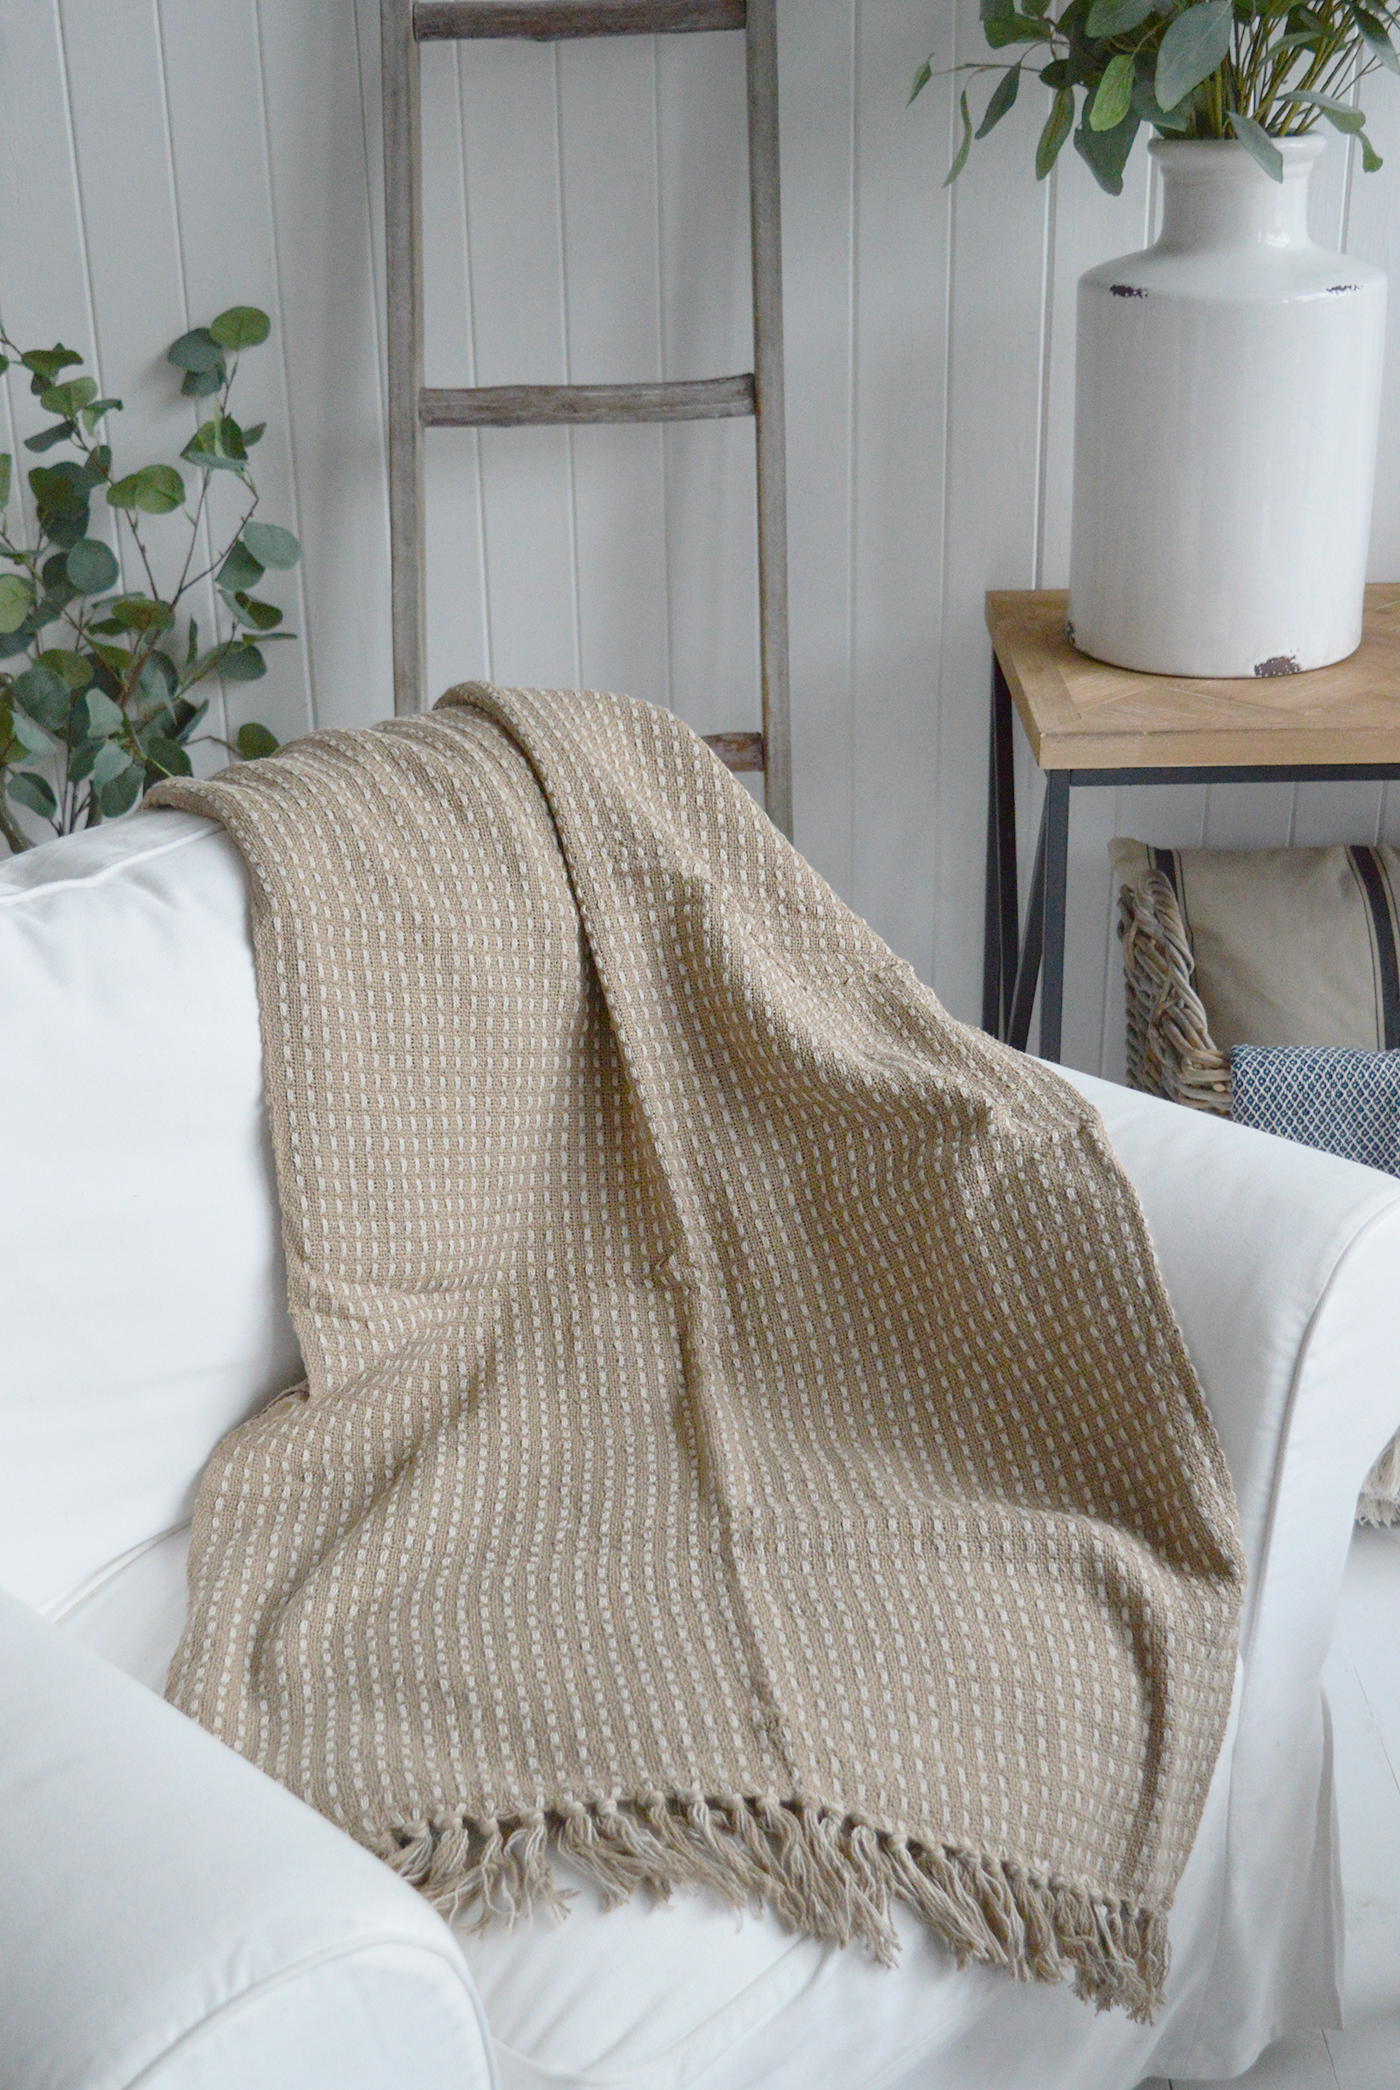 Camden range of throws, for New England style homes modern farmhouse, country and coastal interiors